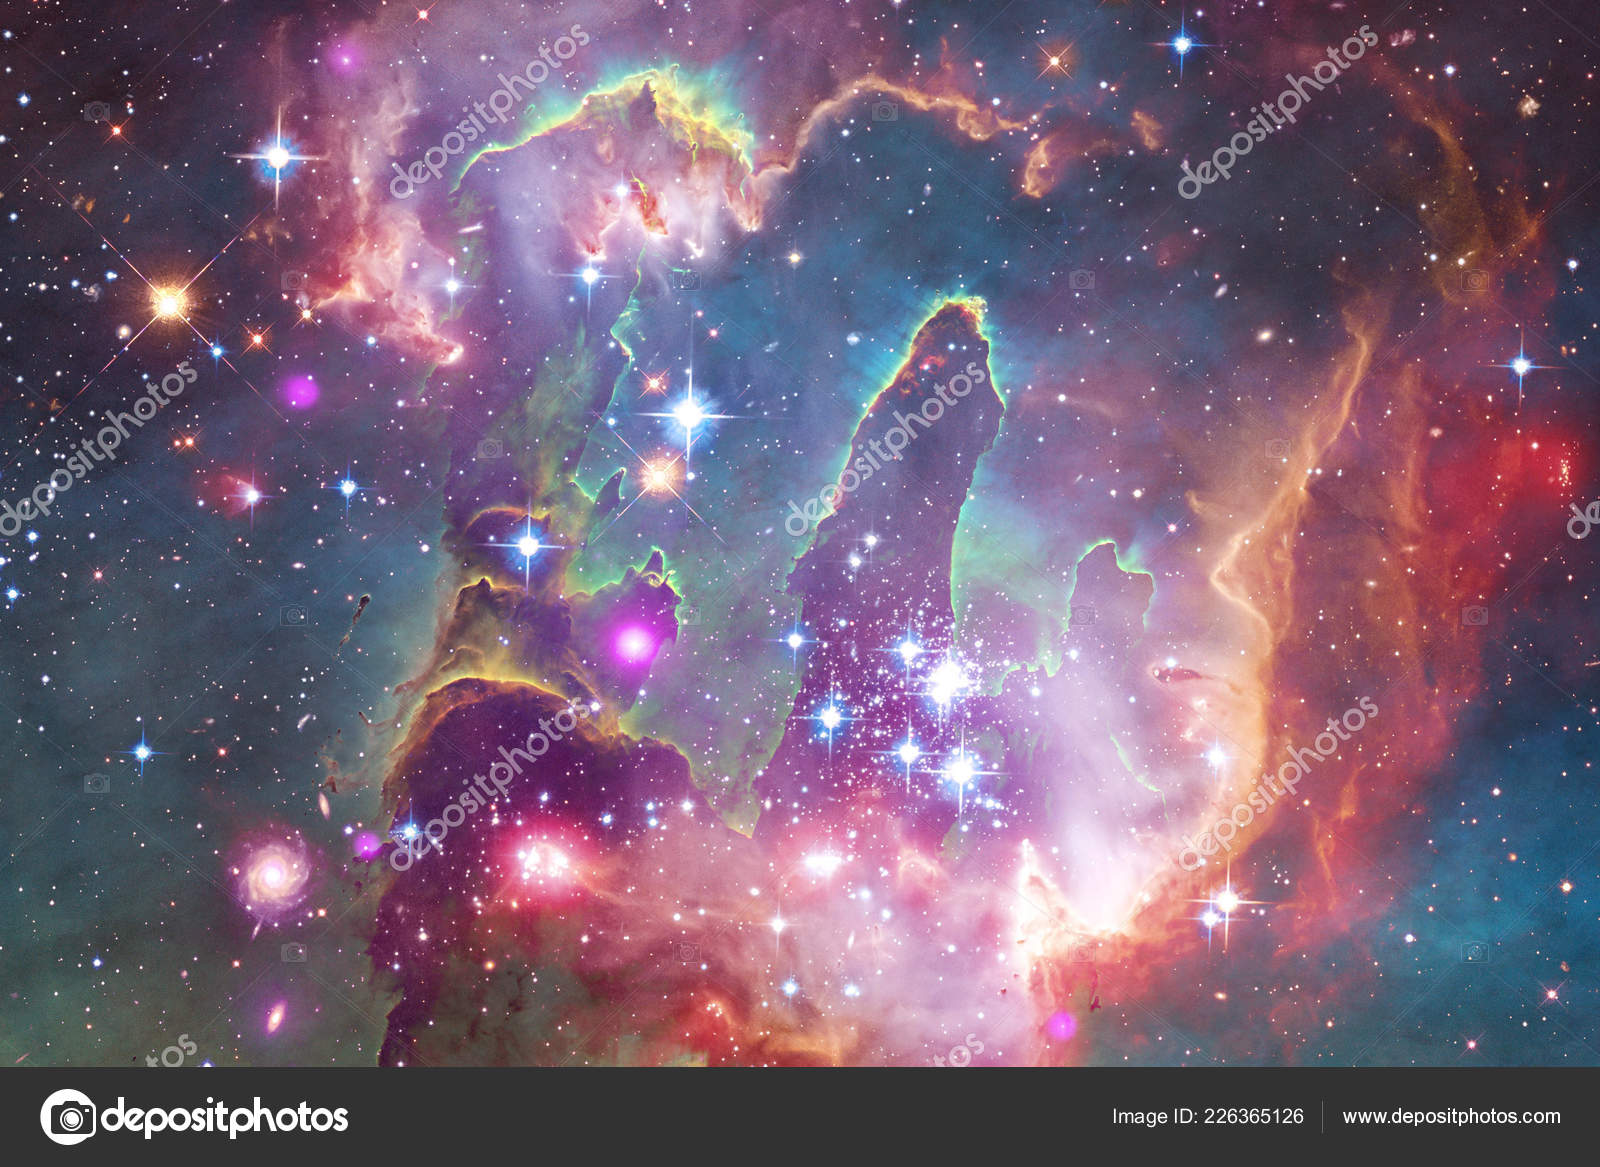 universe wallpaper,nebula,astronomical object,galaxy,sky,outer space